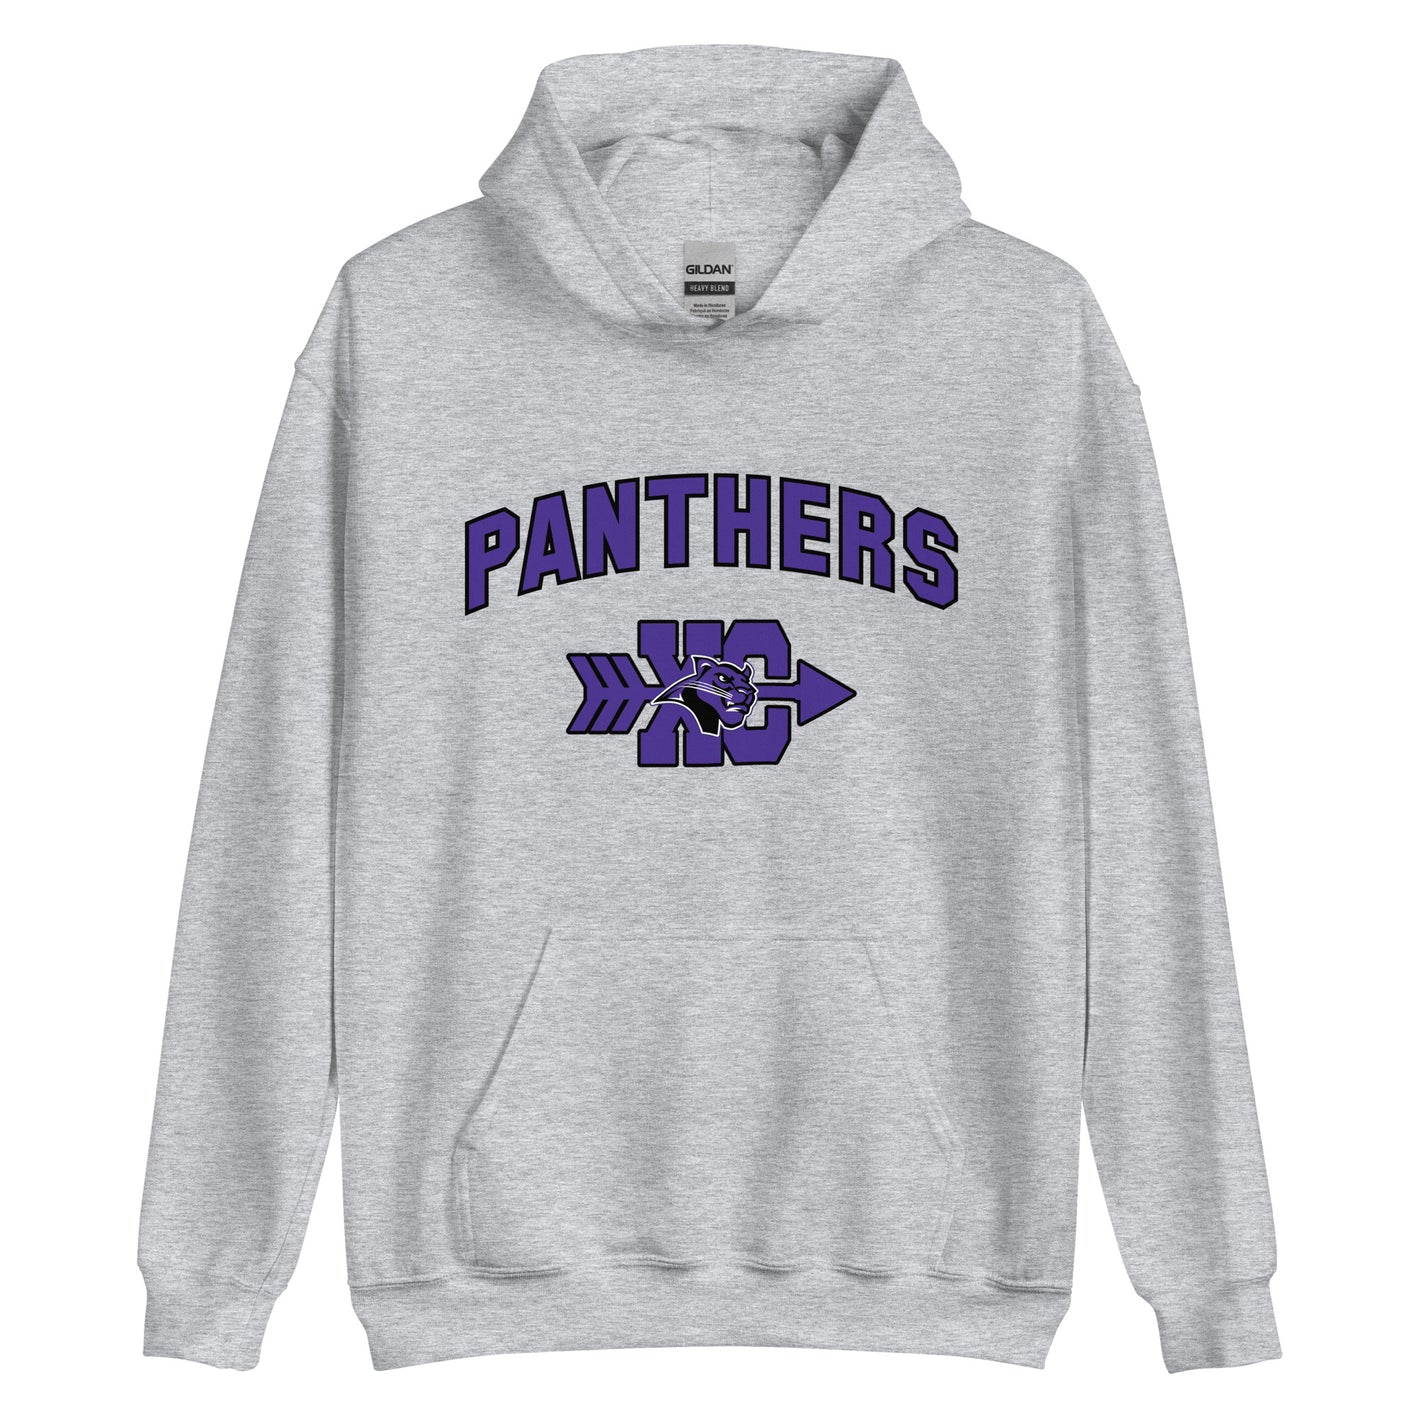 Panthers Cross Country Unisex Hoodie